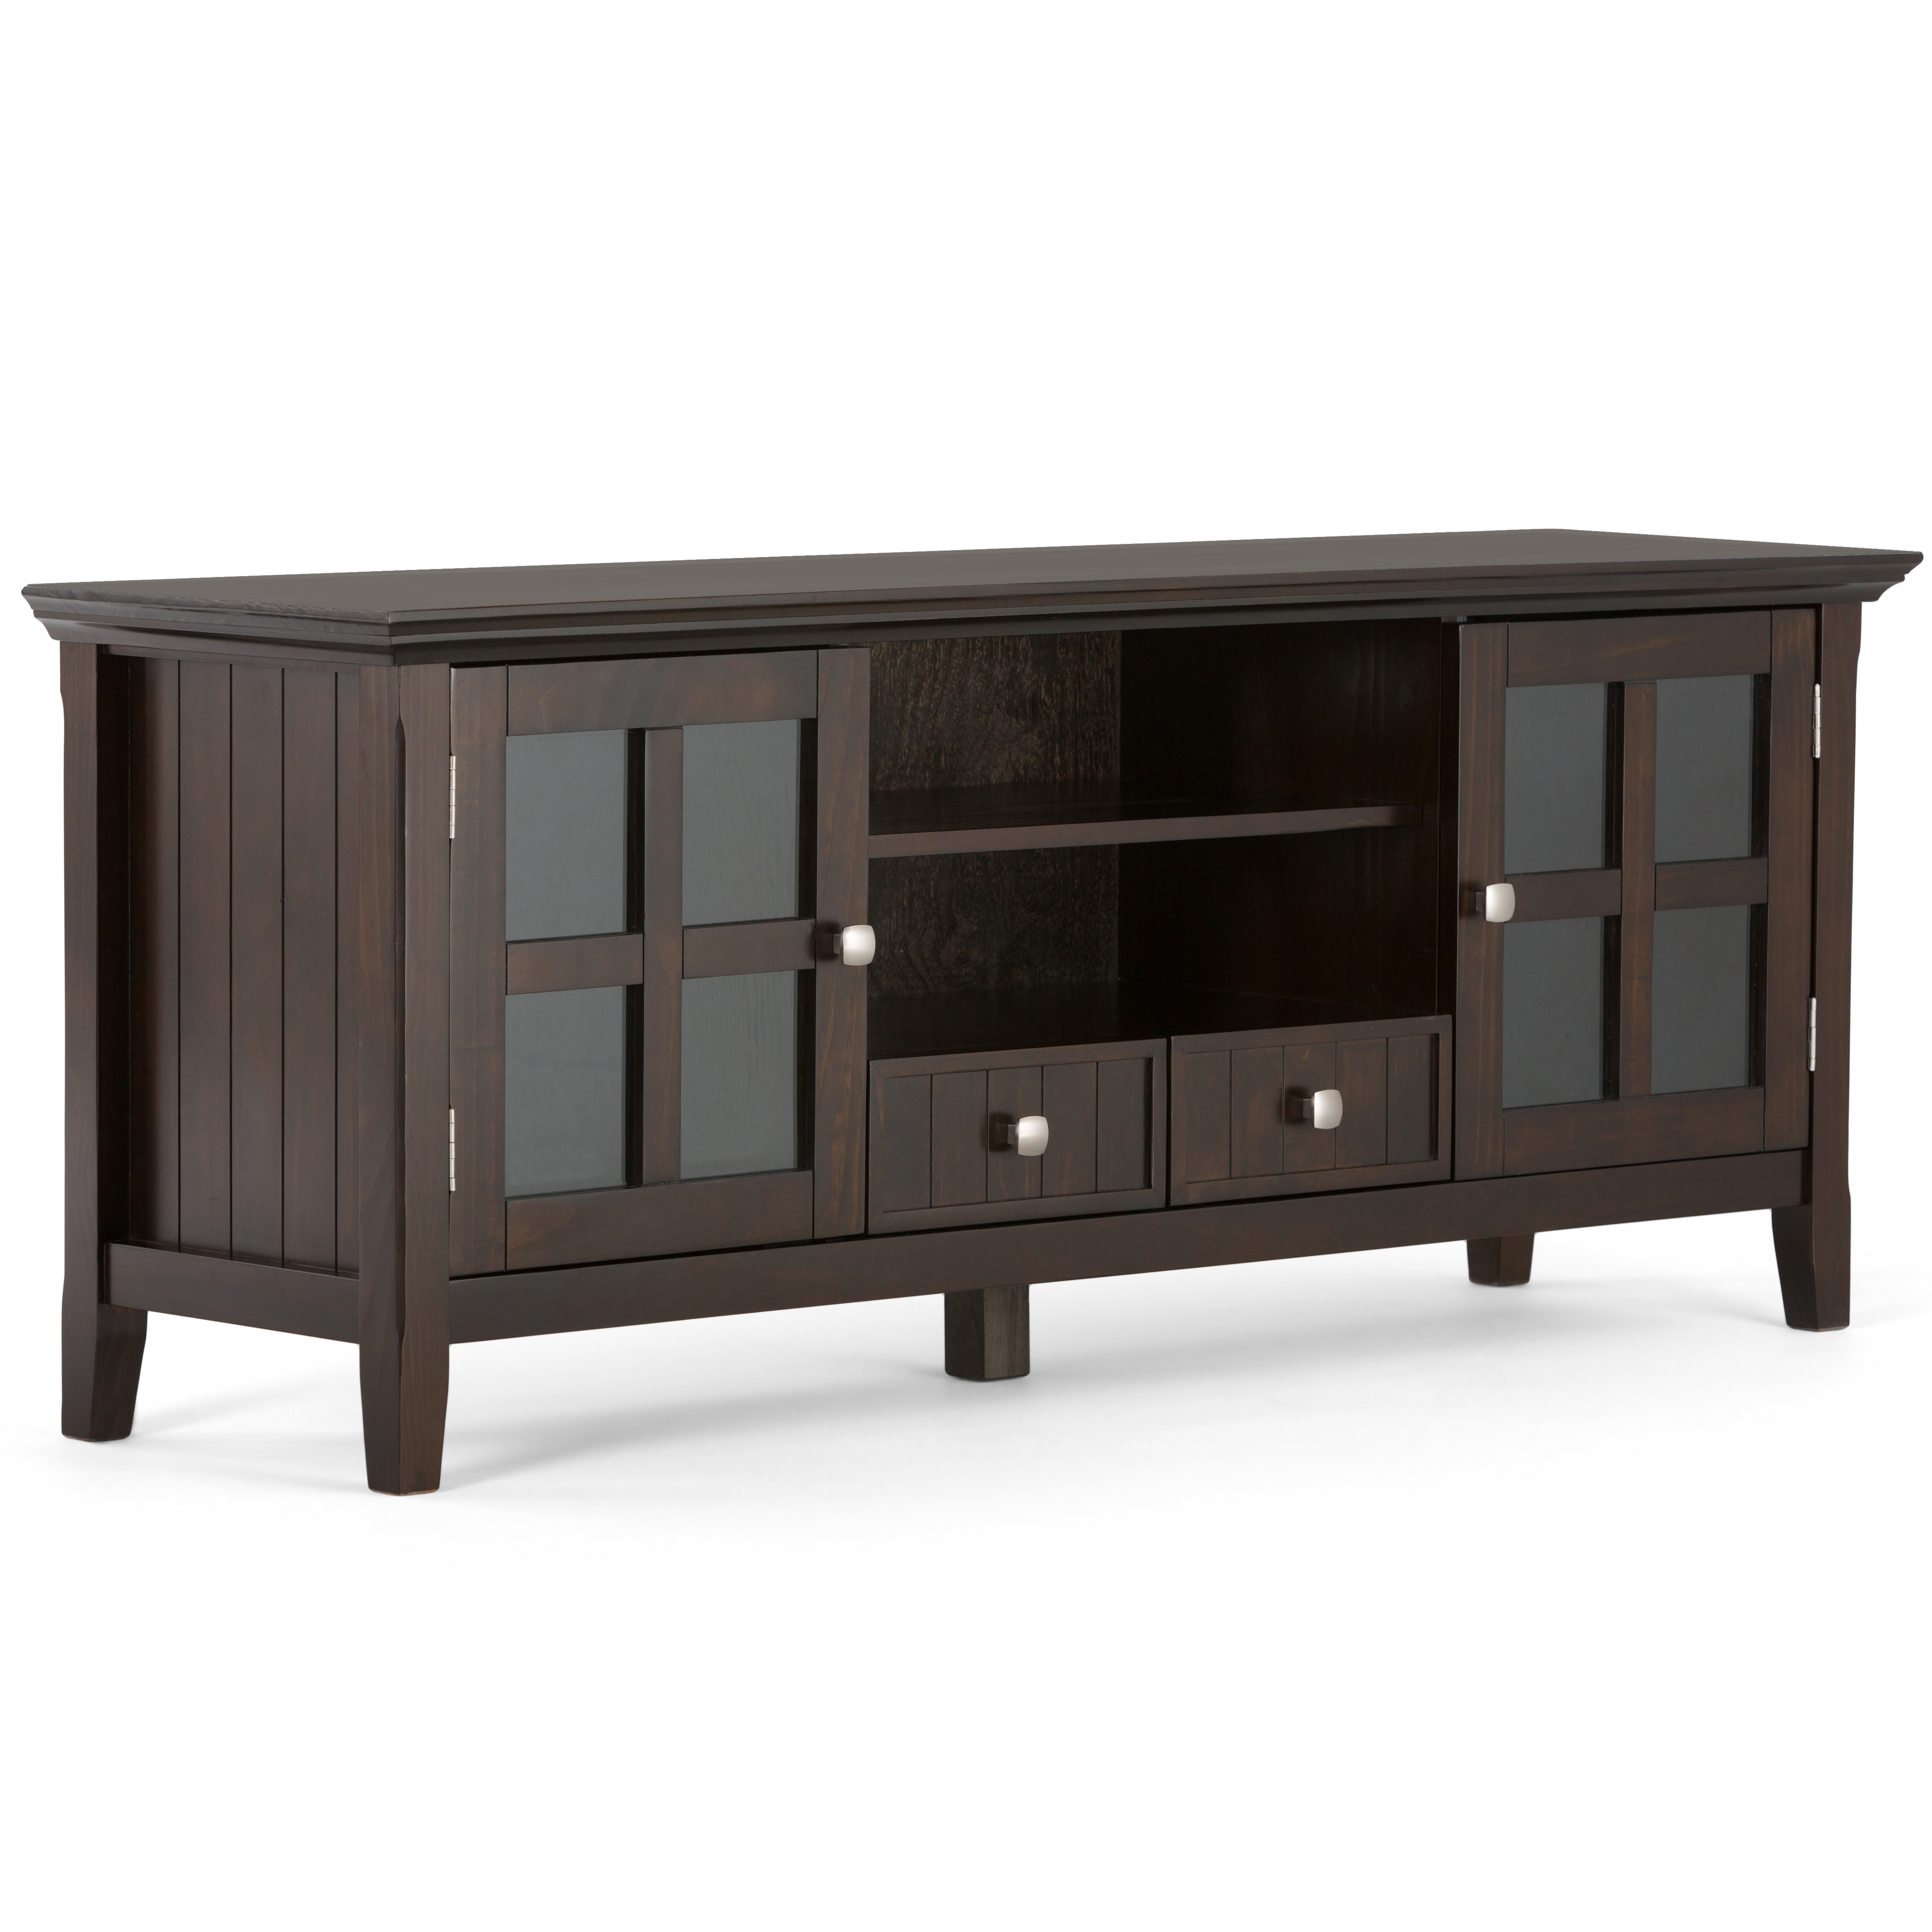 Simpli Home Acadian SOLID WOOD 60 inch Wide Transitional TV Media Stand in Brunette Brown For TVs up to 65 inches